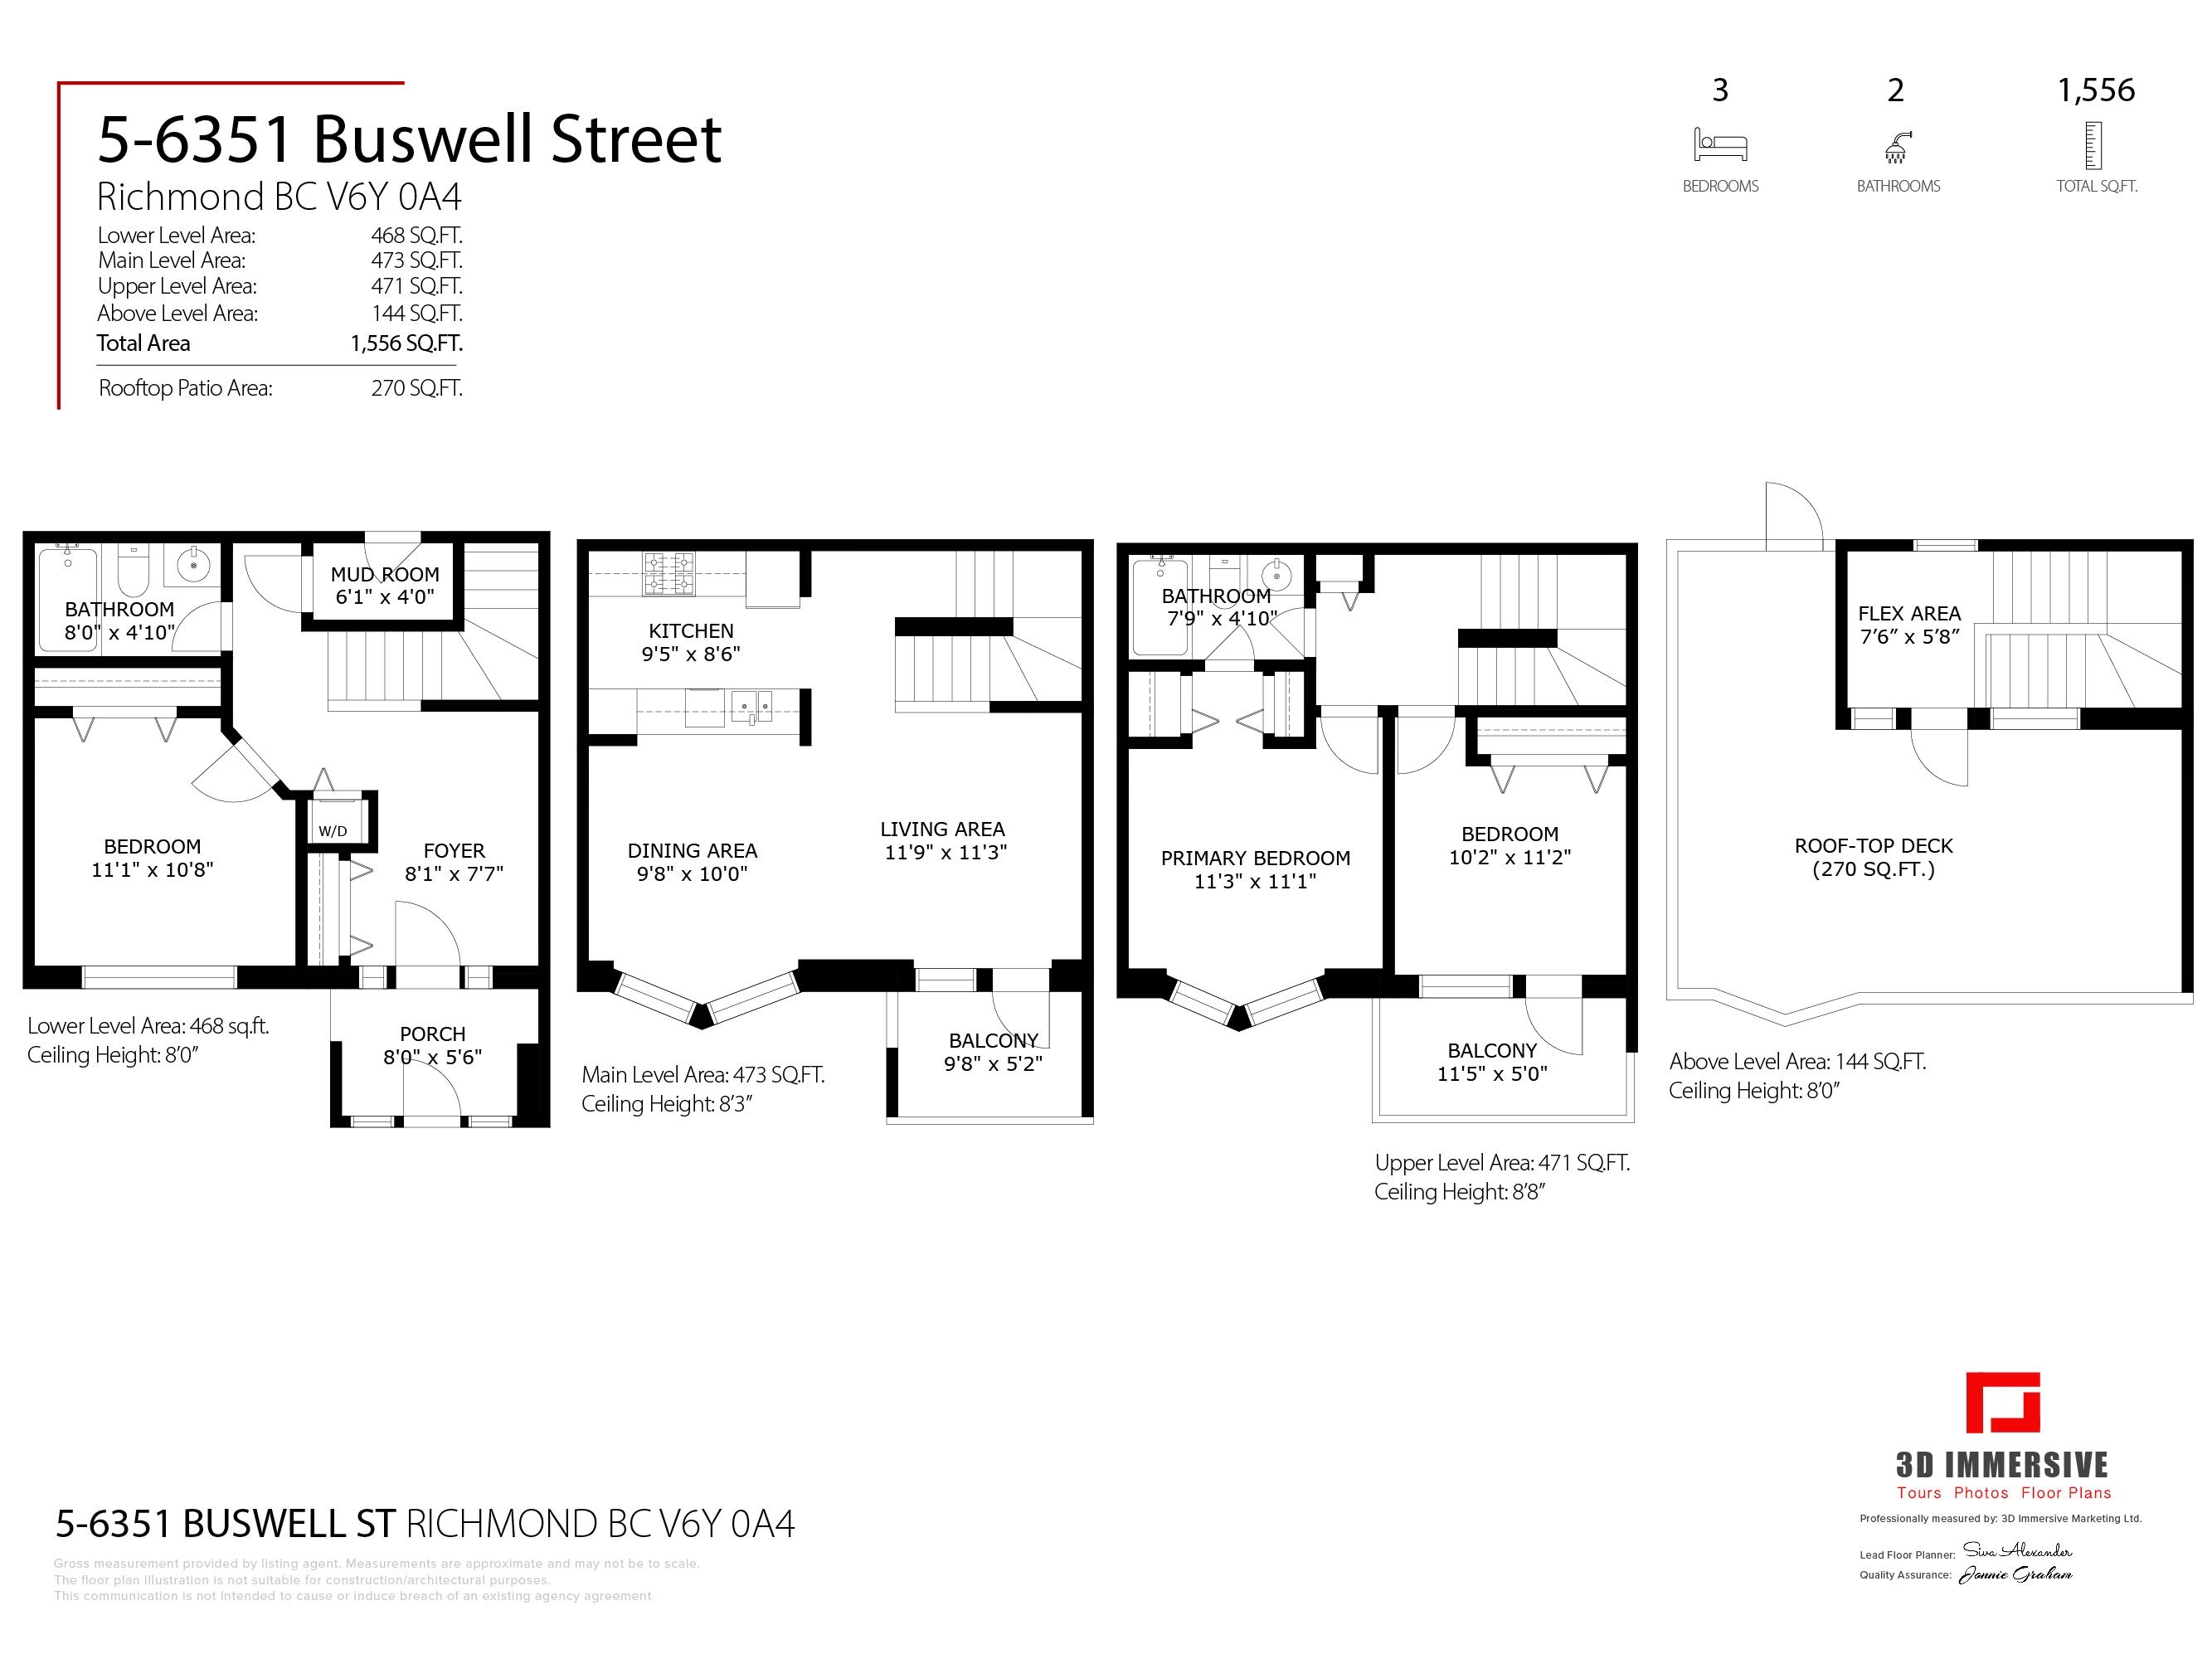 Listing image of 5 6351 BUSWELL STREET